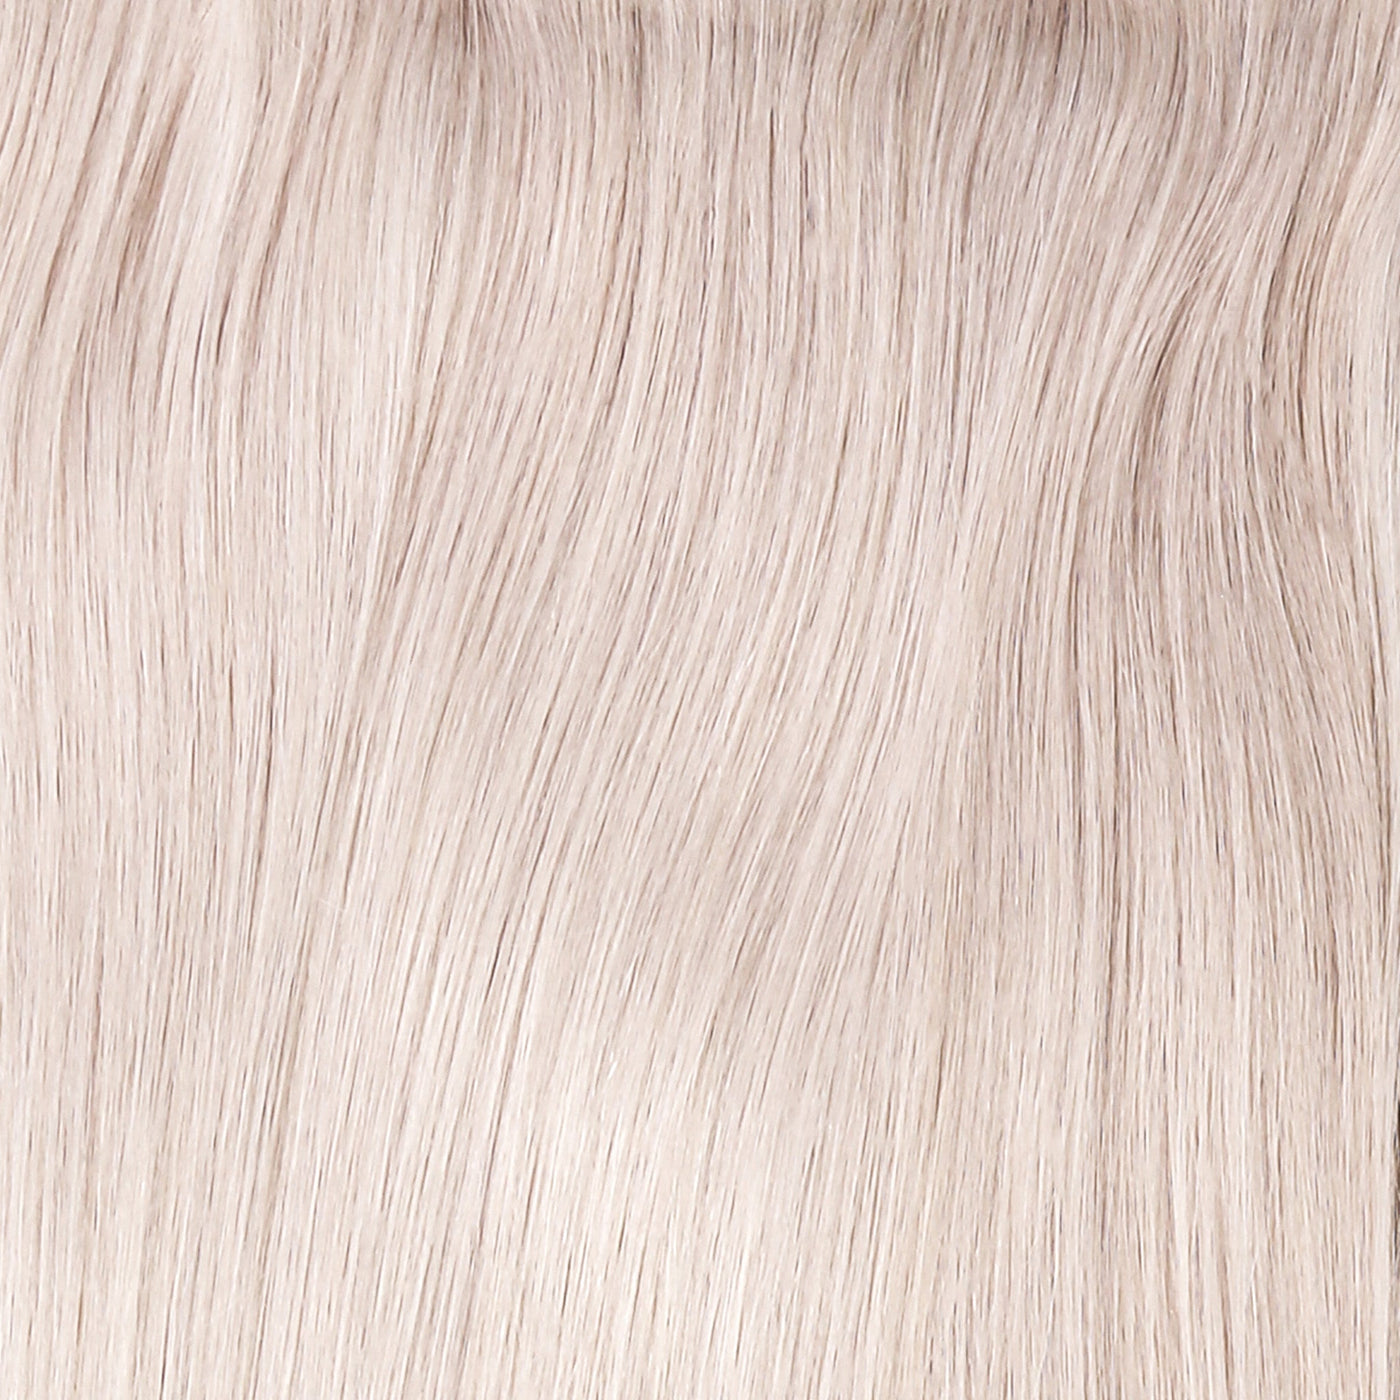 #62 Icy Blonde Ultra Narrow Clip In Hair Extensions